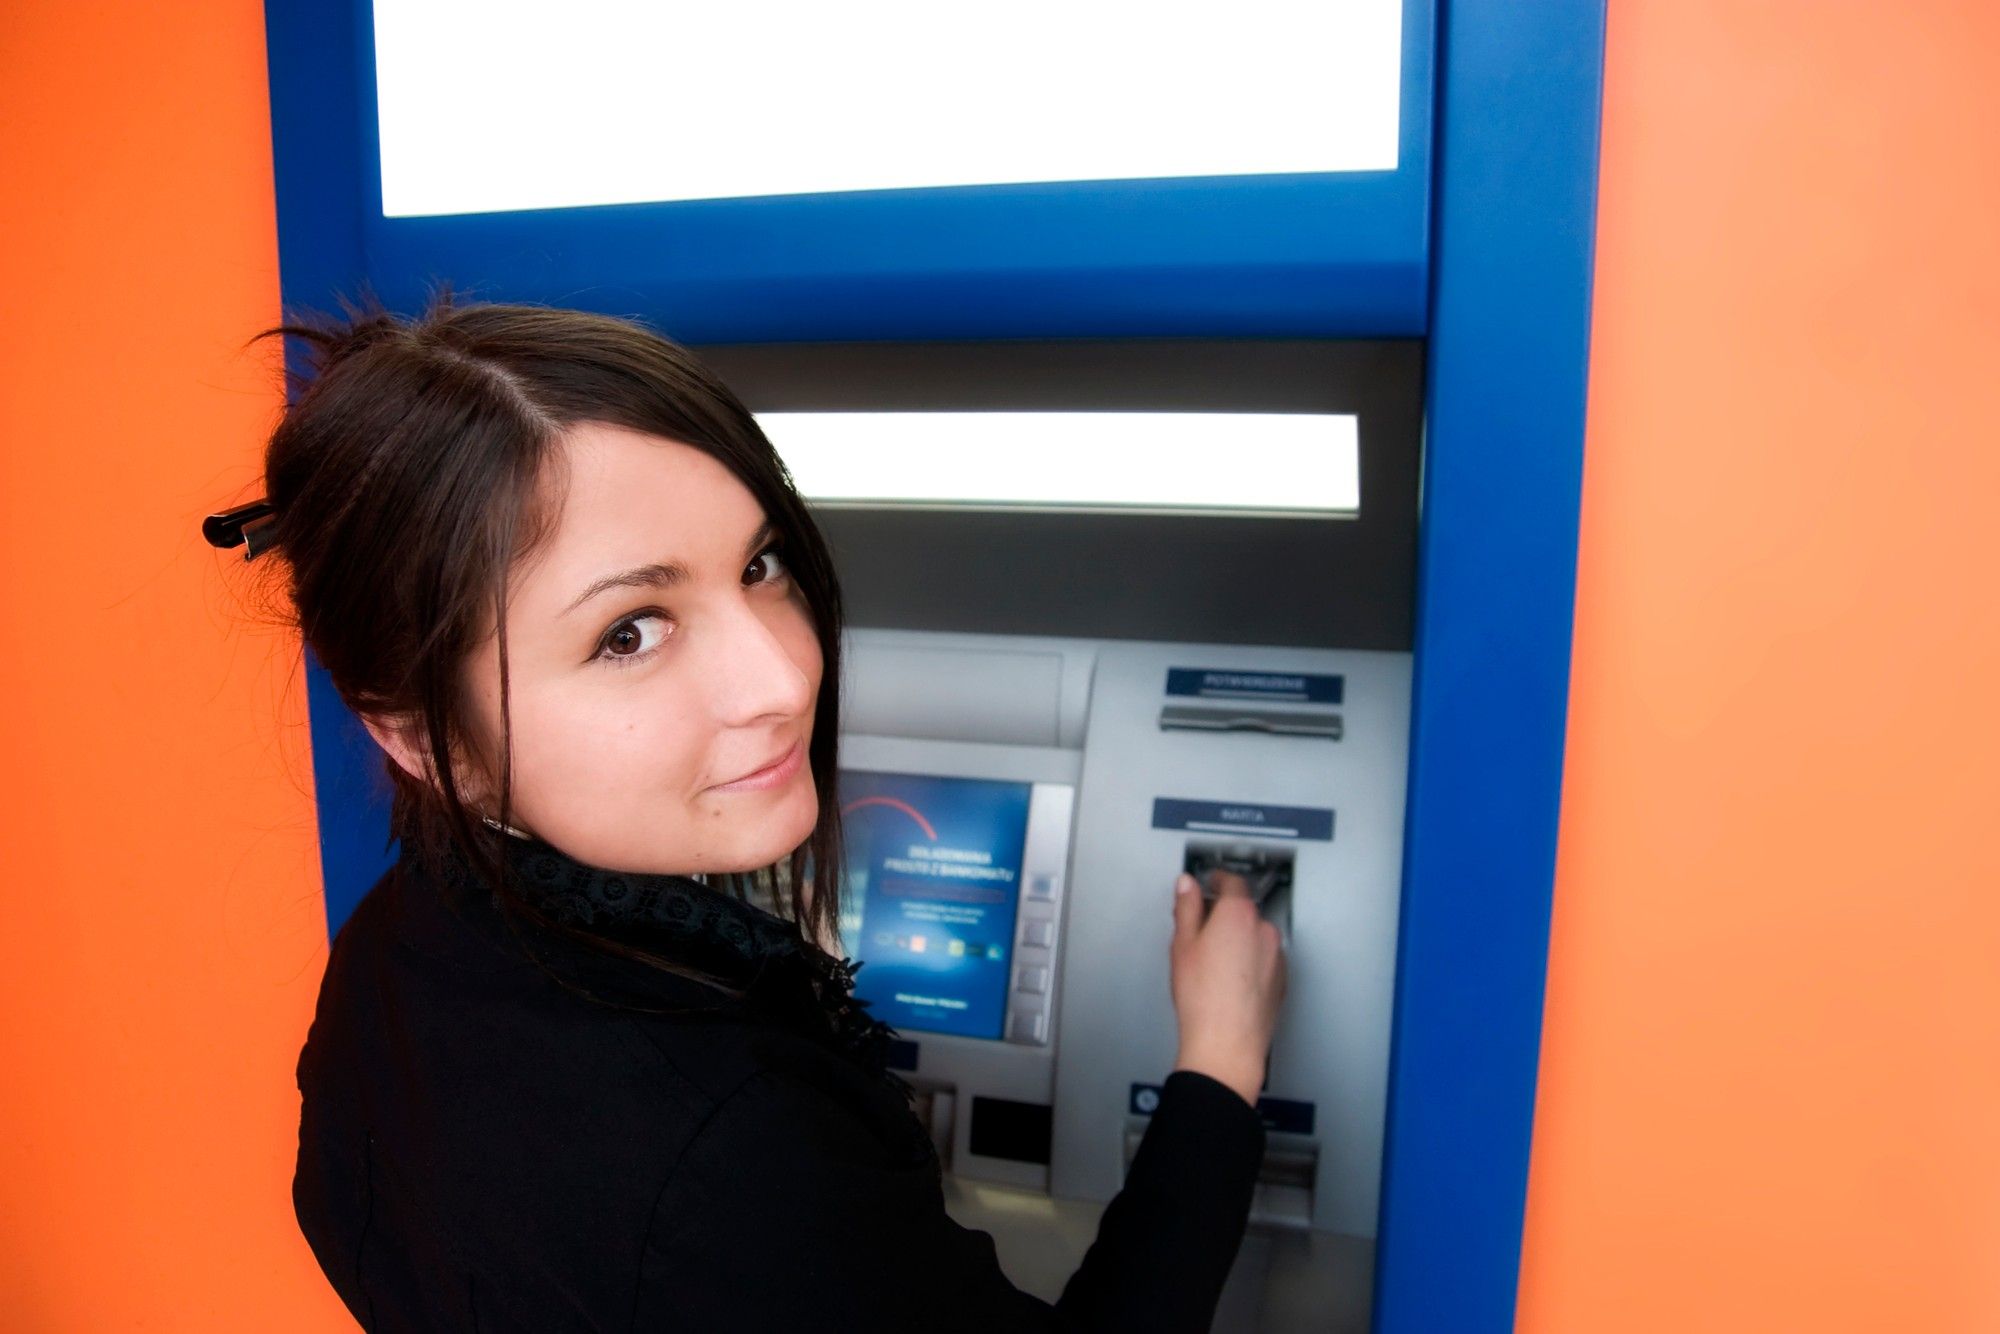 young woman at an ATM machine